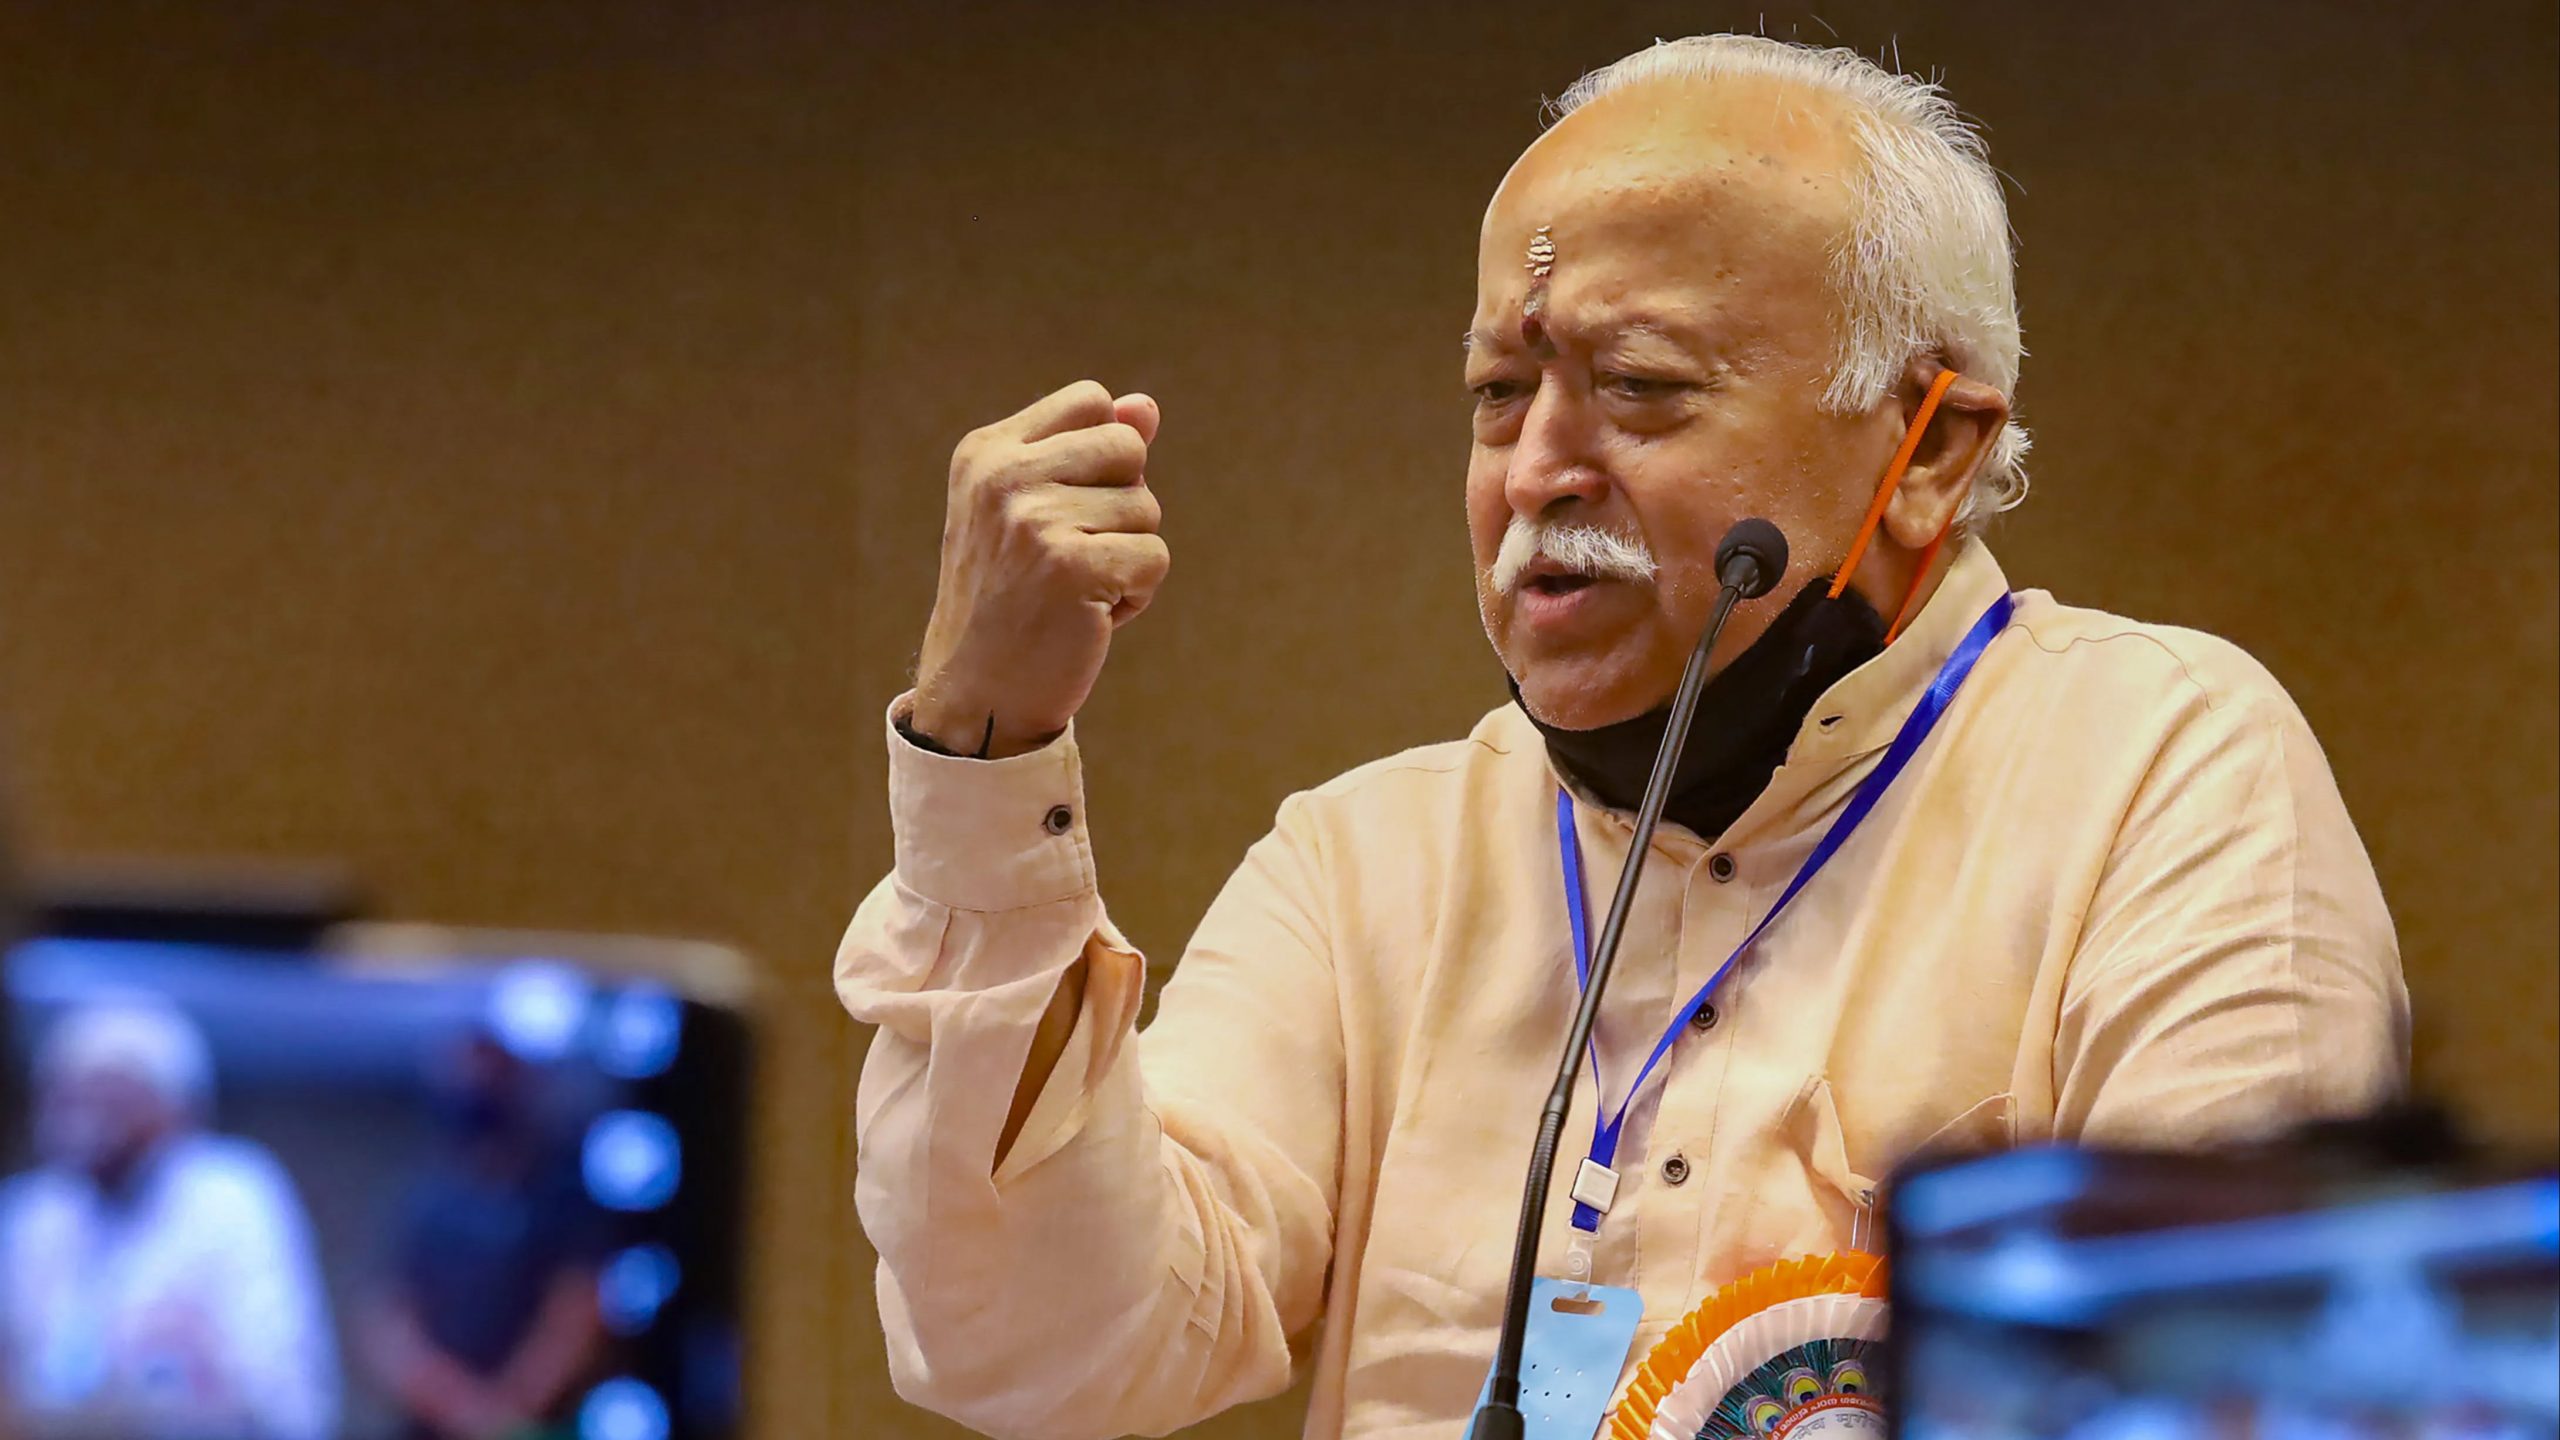 ‘My religion is the religion of all religions’: RSS chief Mohan Bhagwat